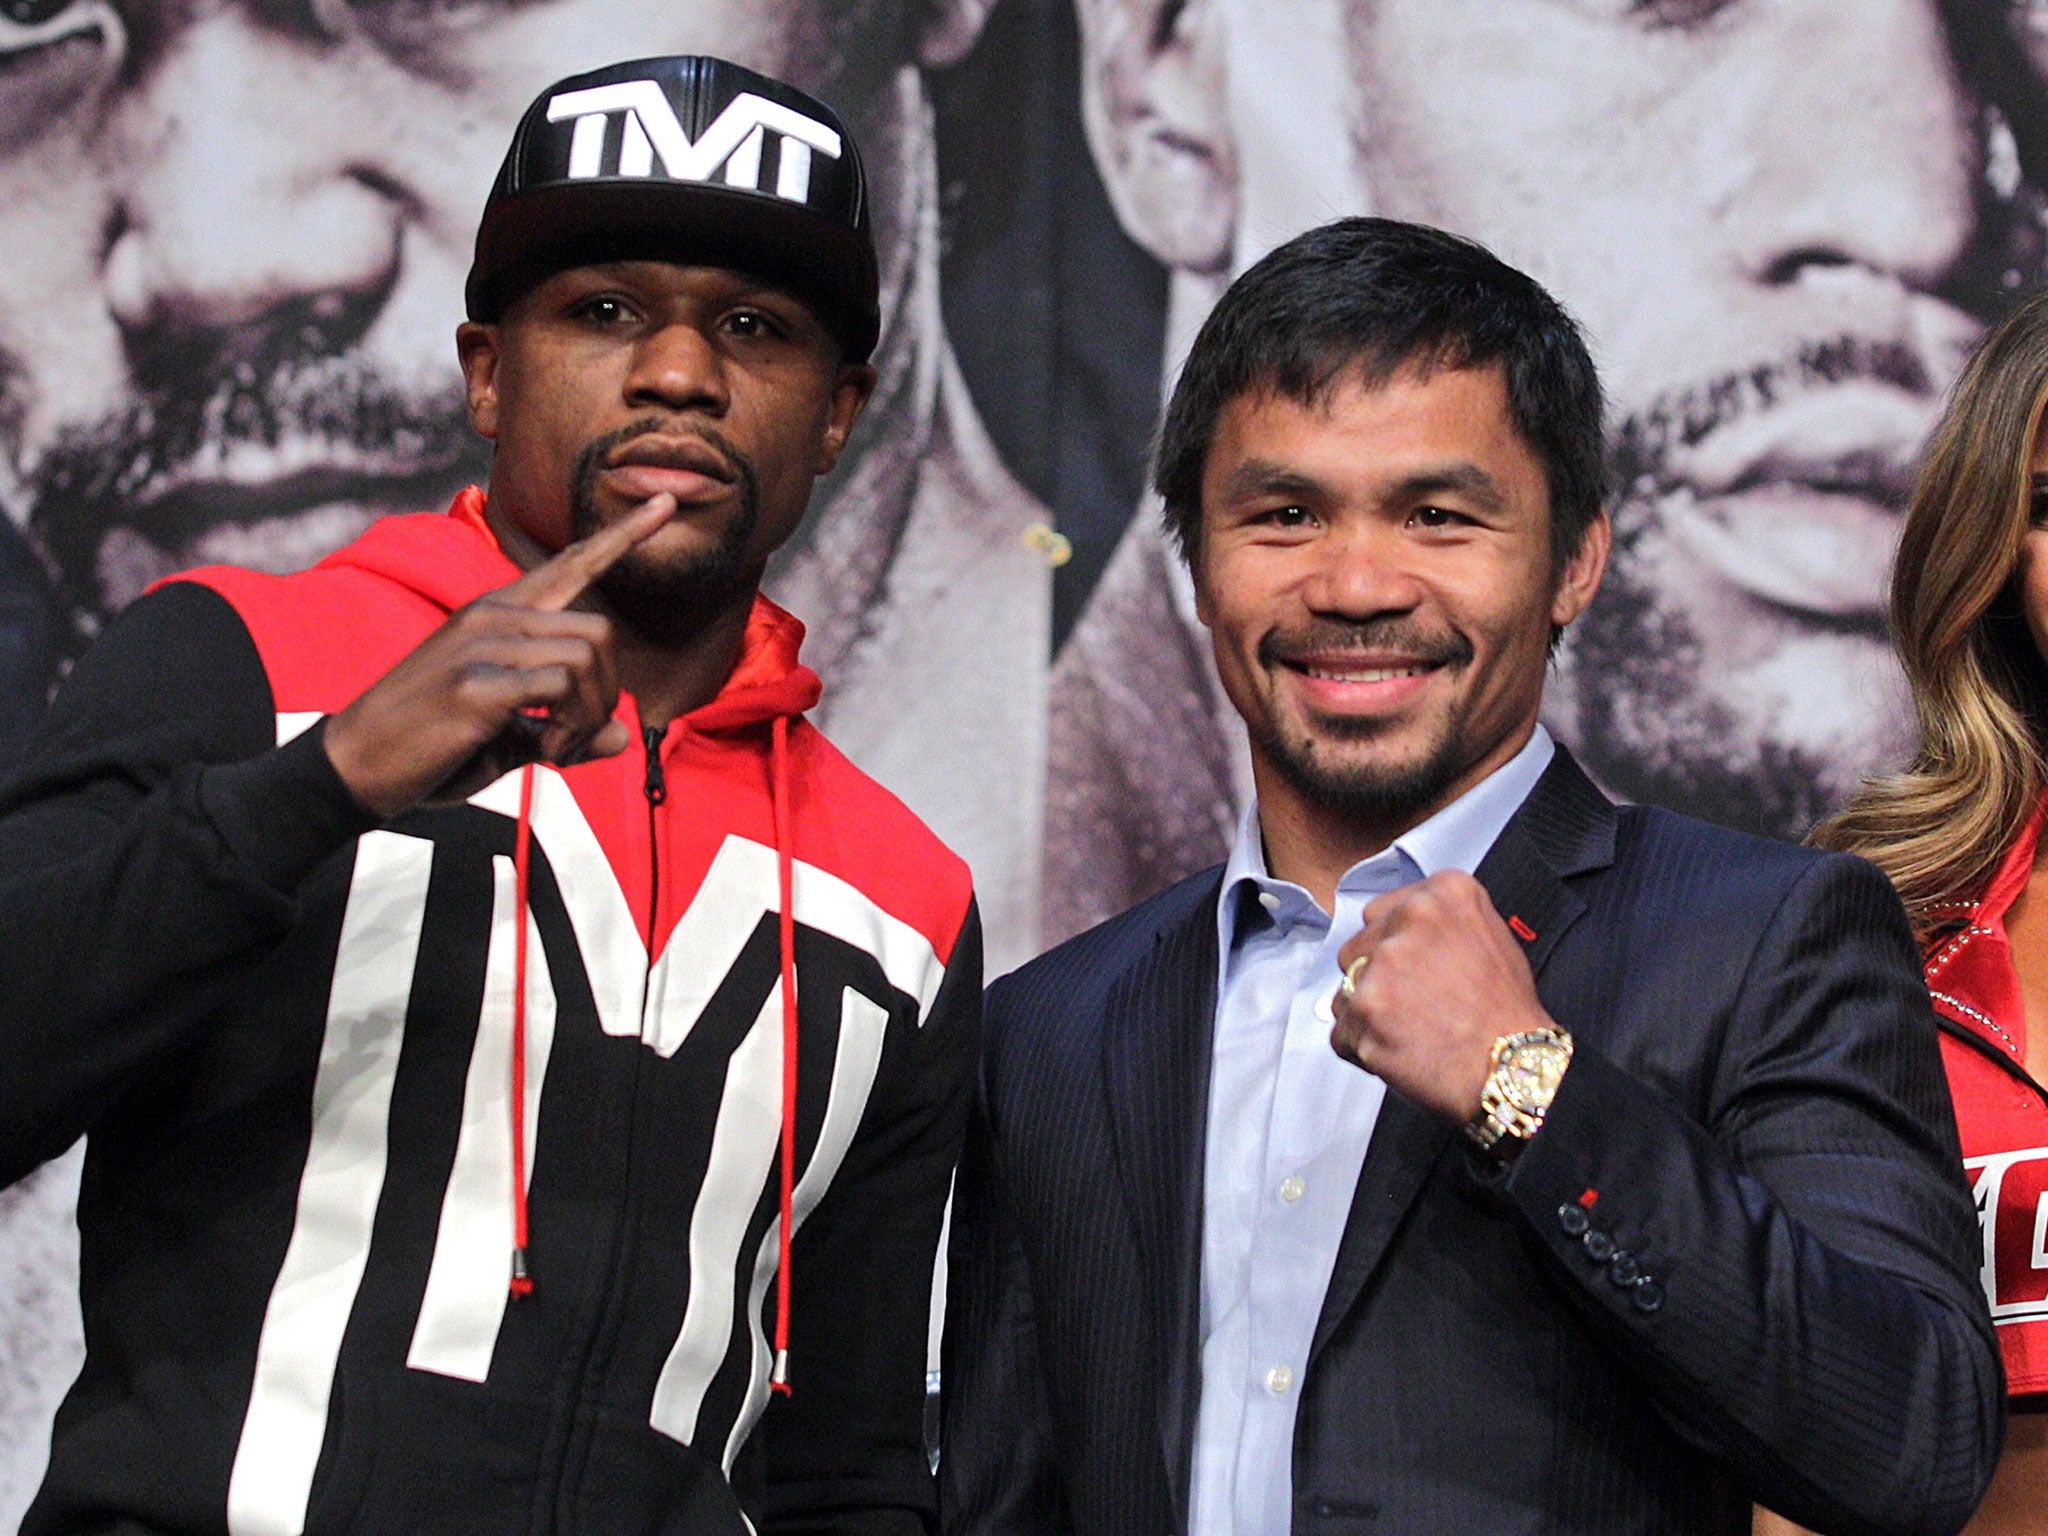 Floyd Mayweather vs Manny Pacquiao weigh-in What time does it start and what channel is it on? The Independent The Independent